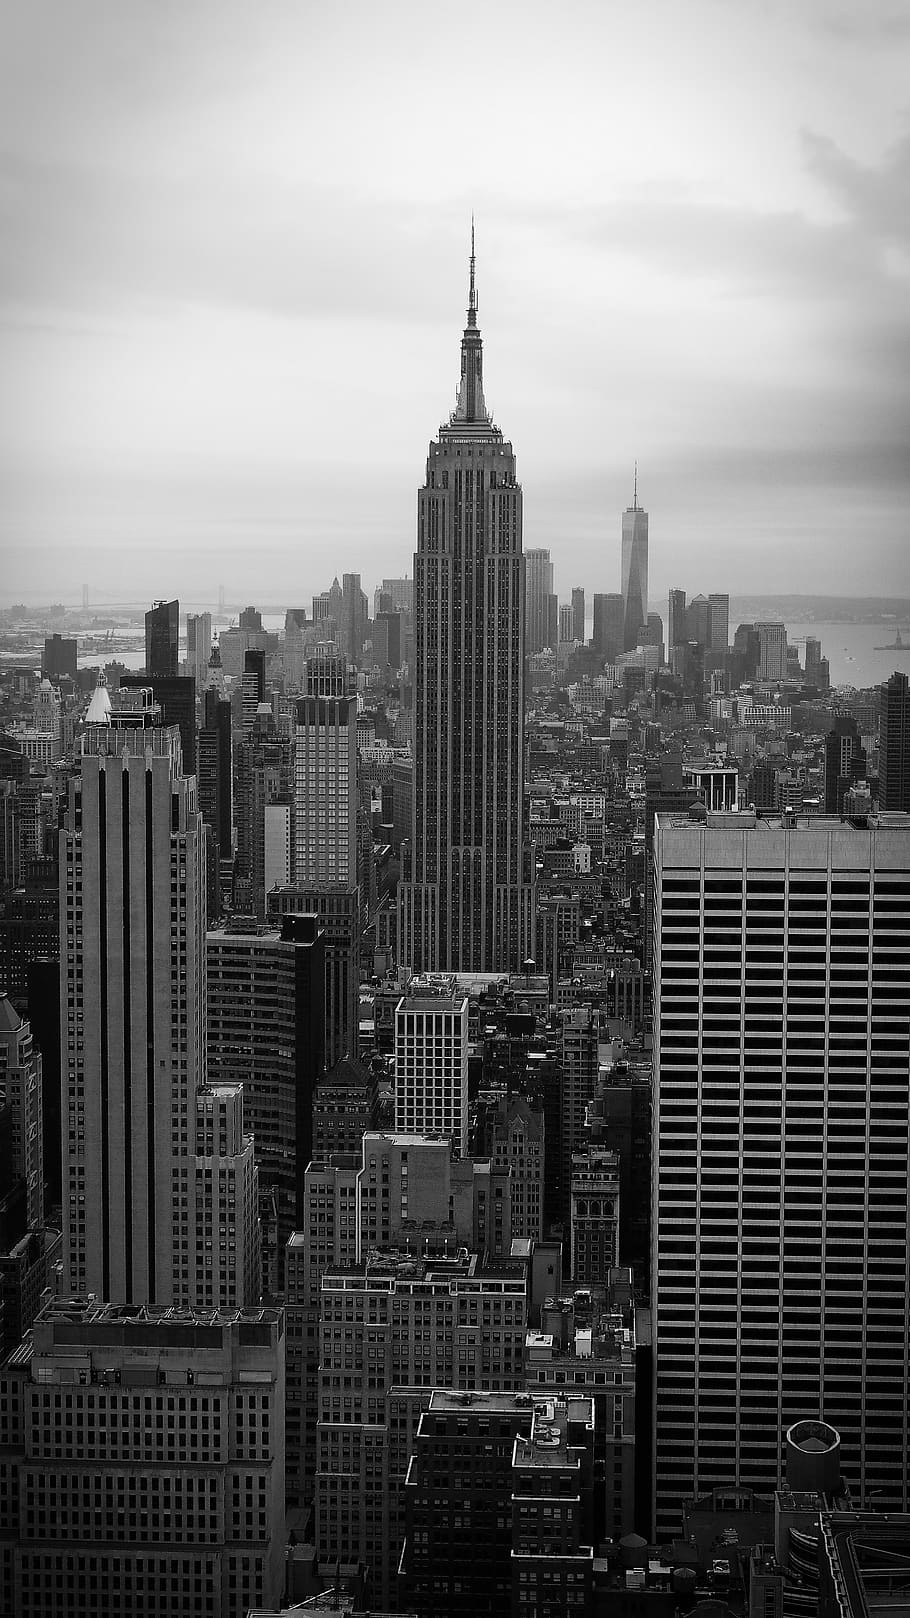 New York Skyline Wallpaper for iPhone - FREE and HD Quality!